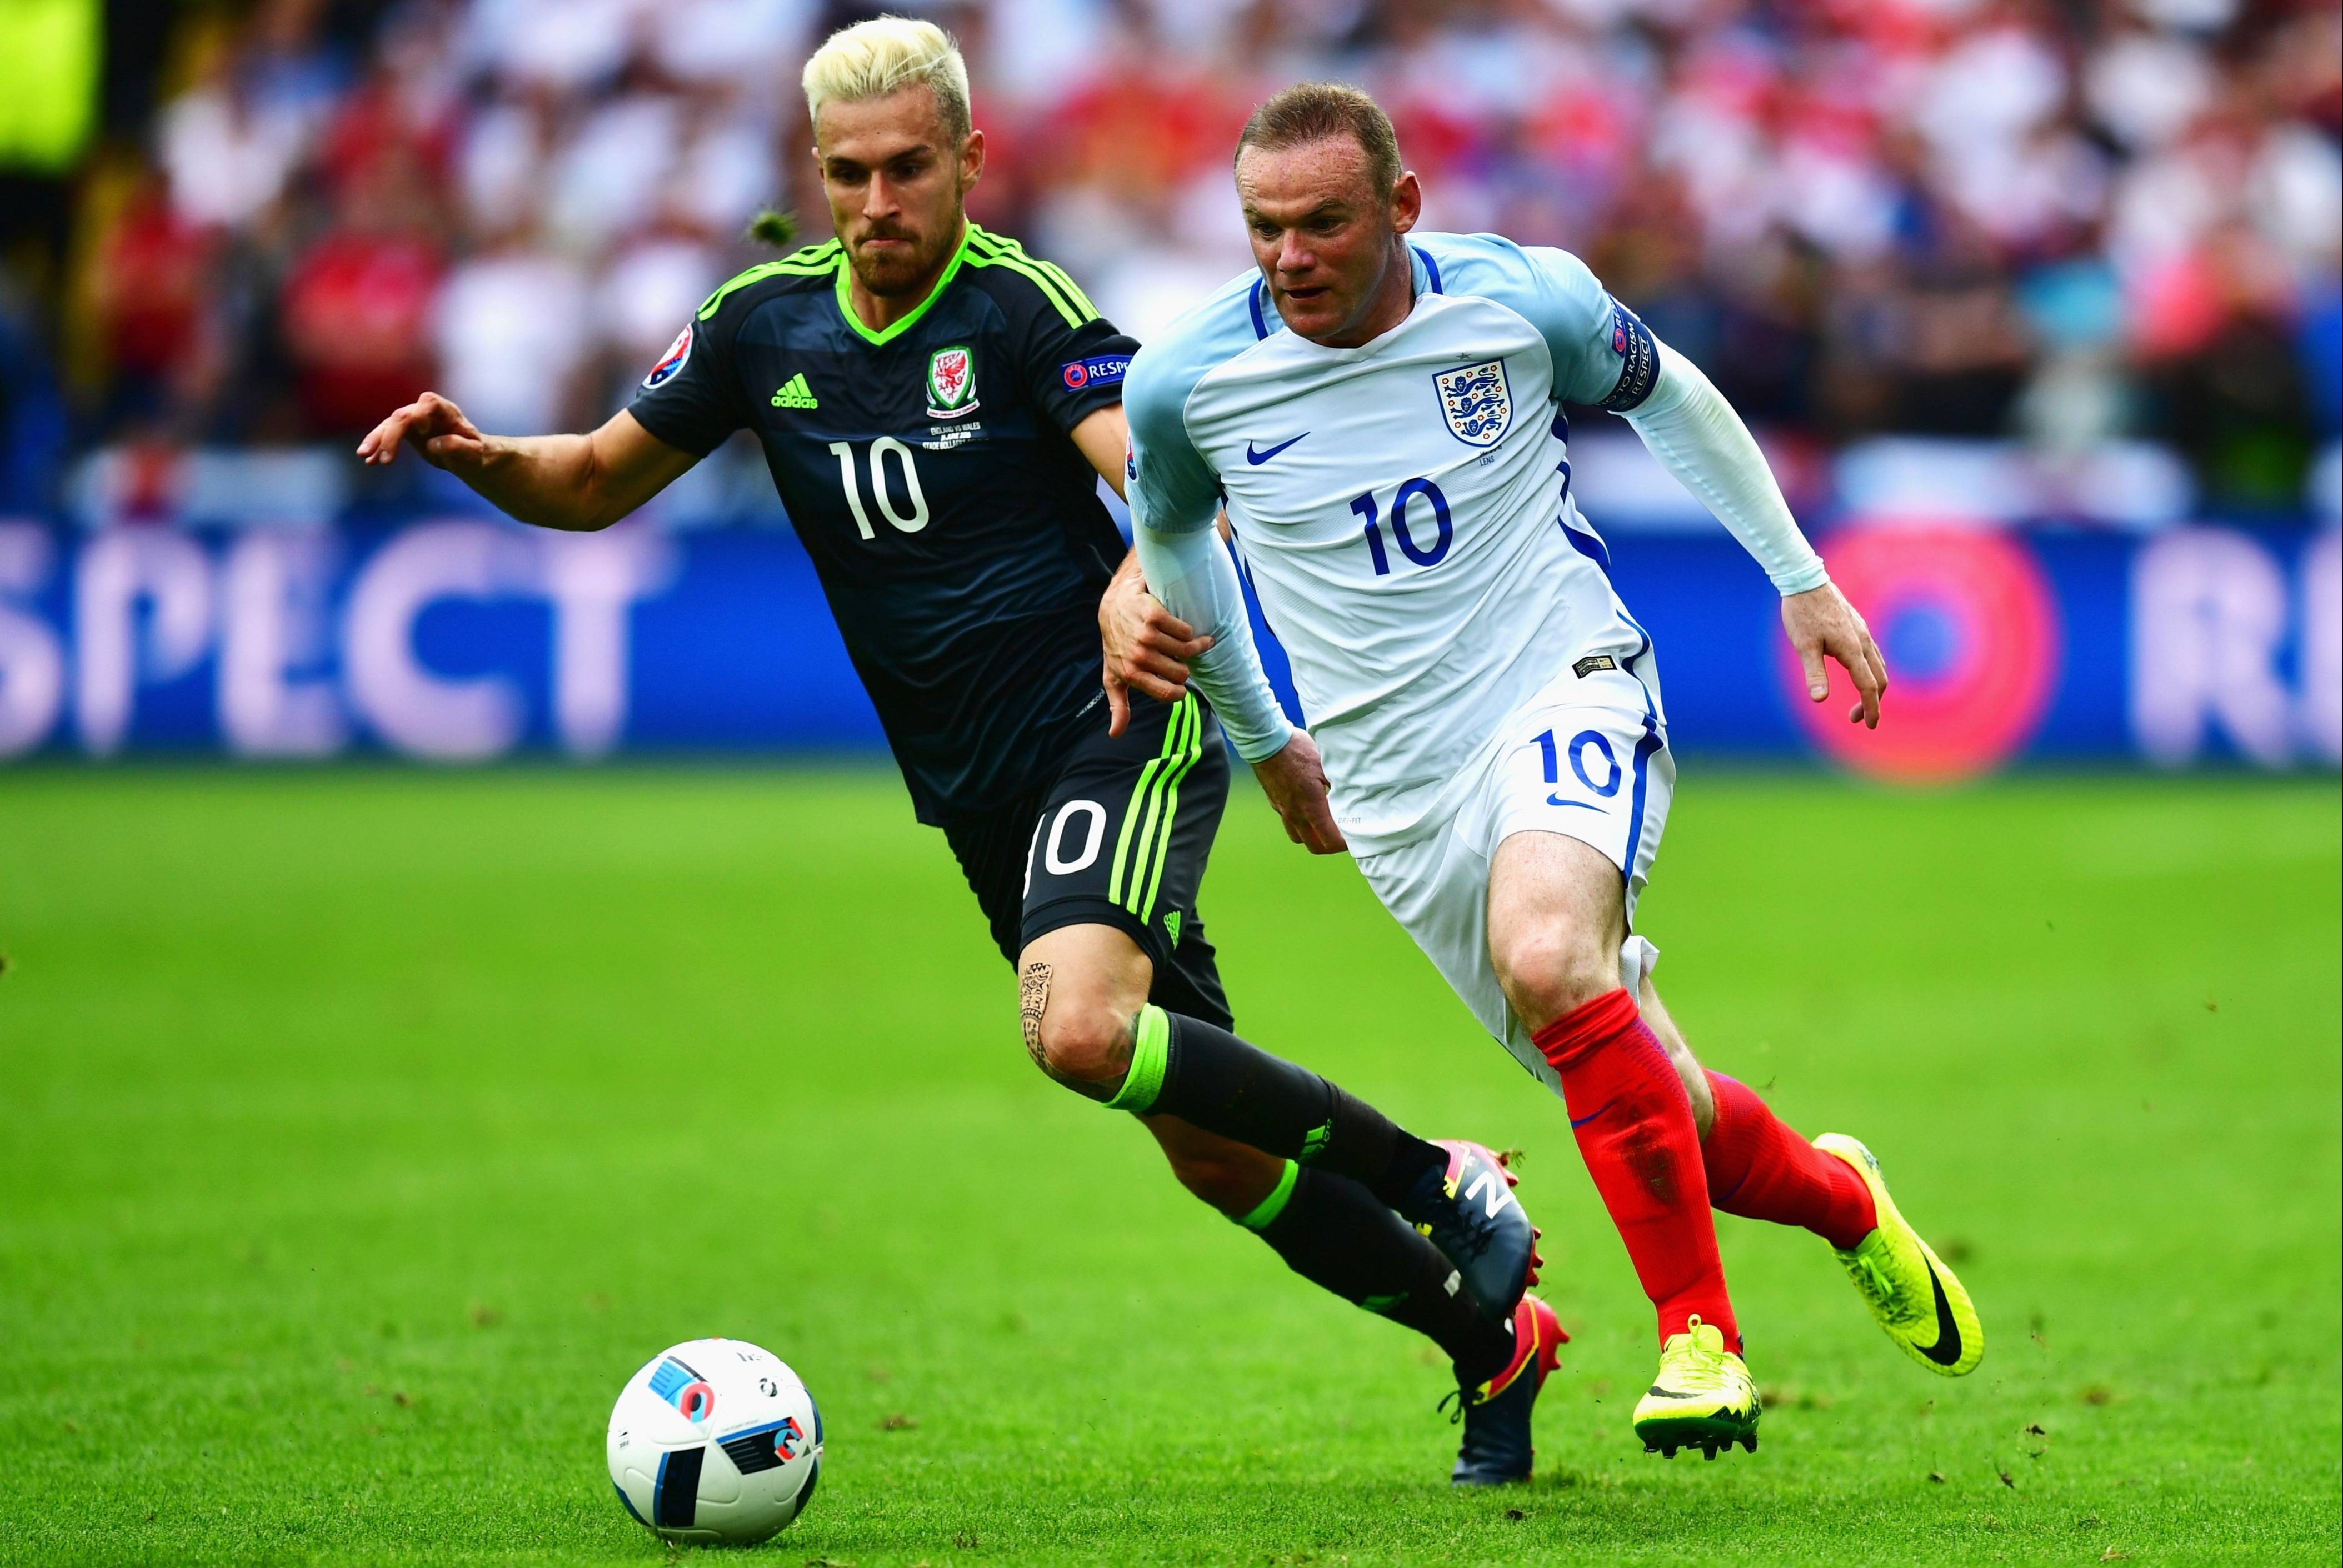 Wales' Aaron Ramsey, left, was in the drug testing room when Rooney smashed the TV